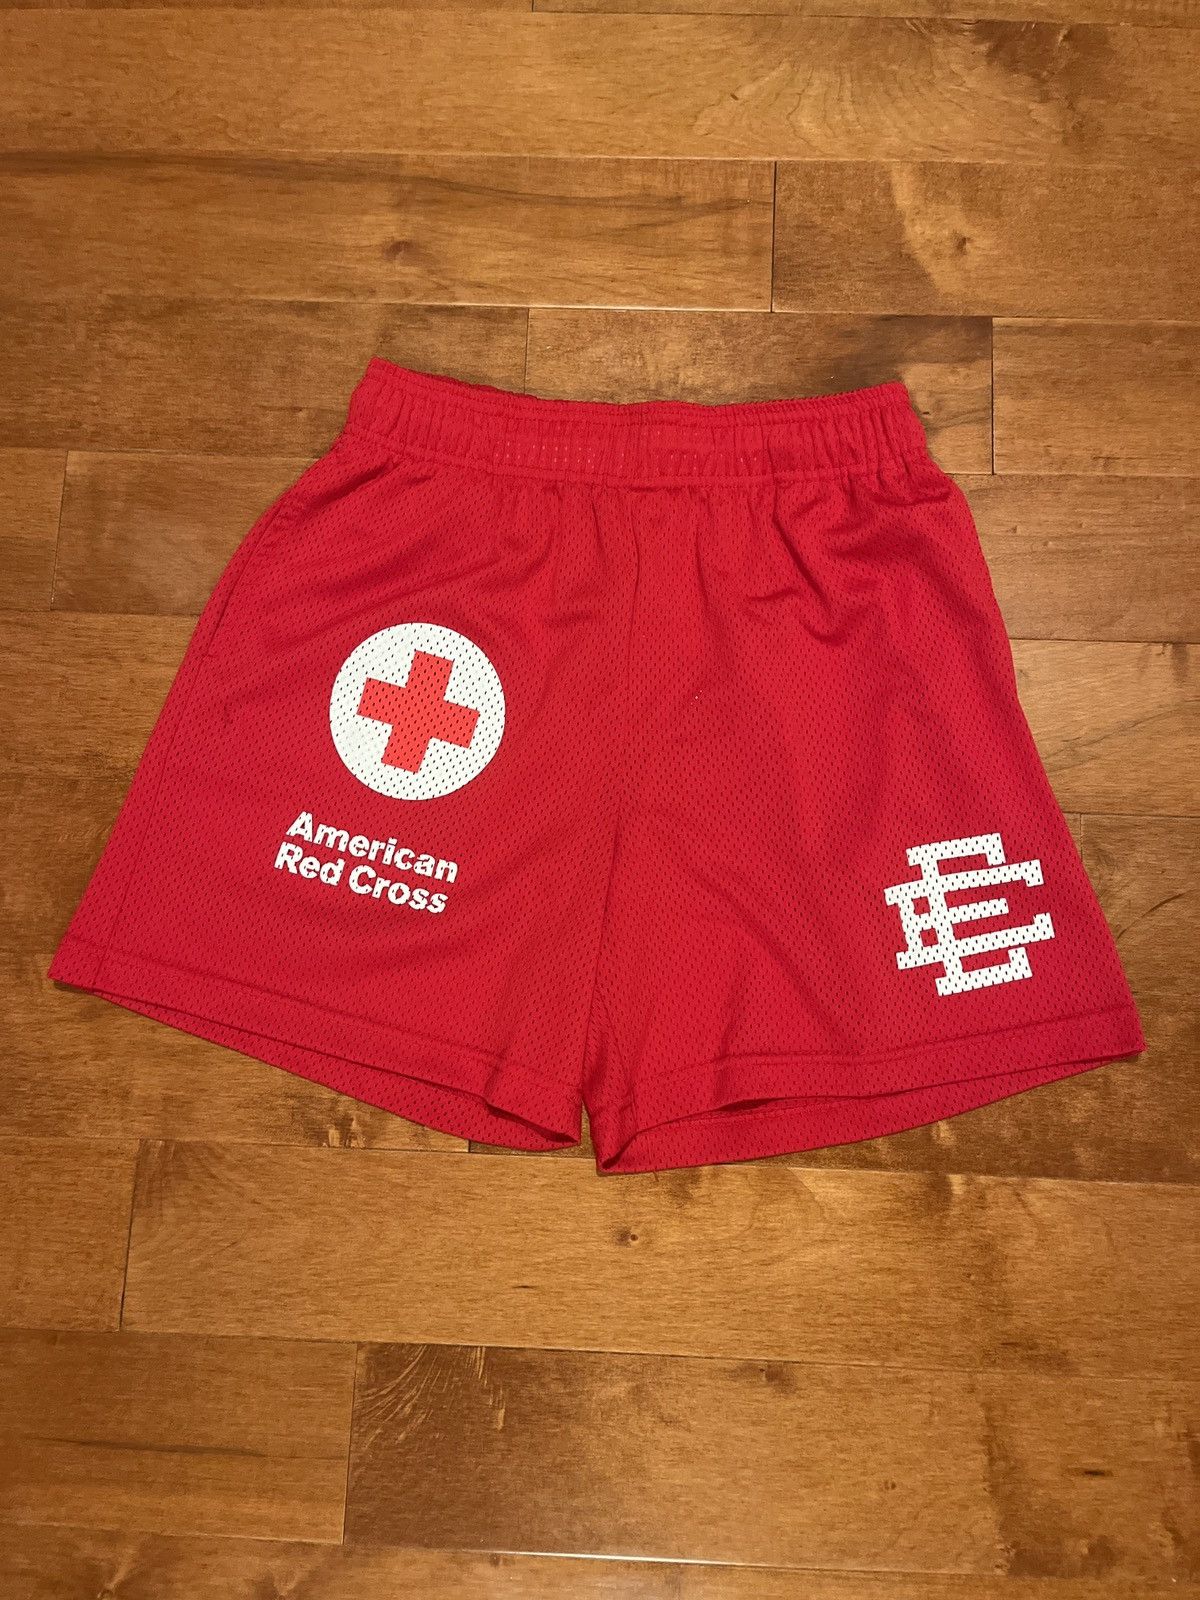 Eric Emanuel Drop For Drop American Red￼ Cross Shorts With Sizing Tips 